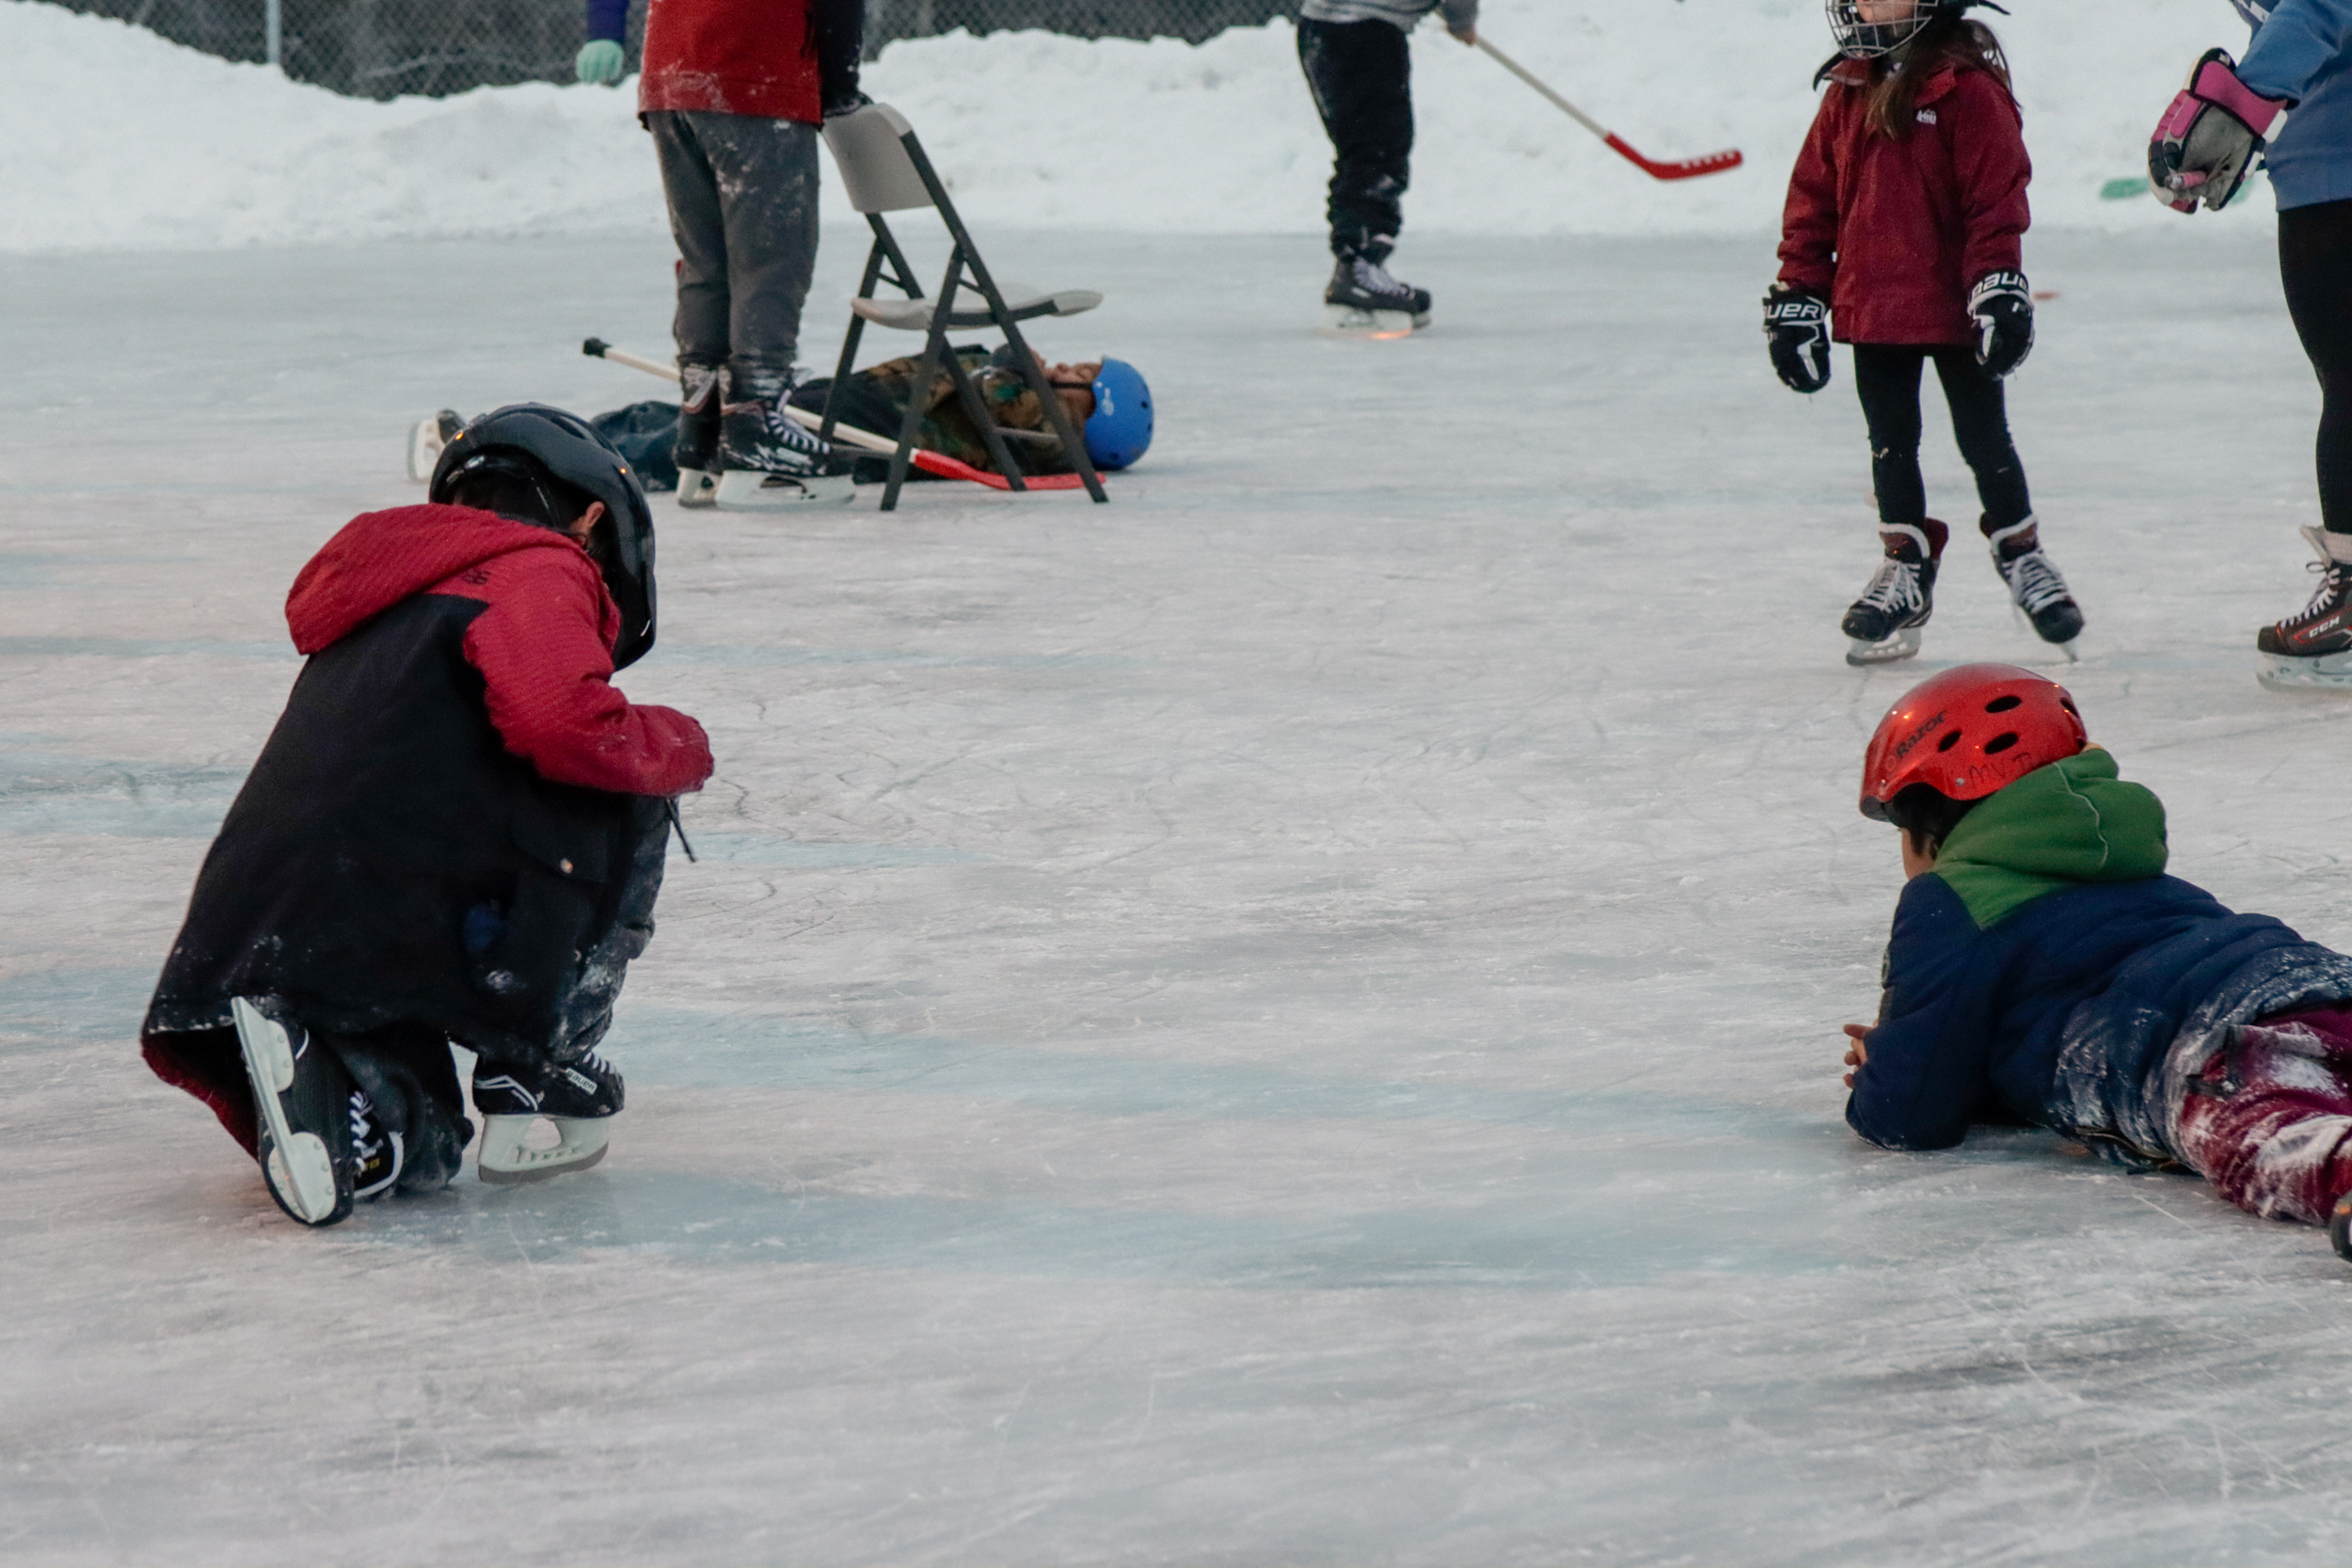 Two children in helmets and skate sit on an ice rink while others skate around them.